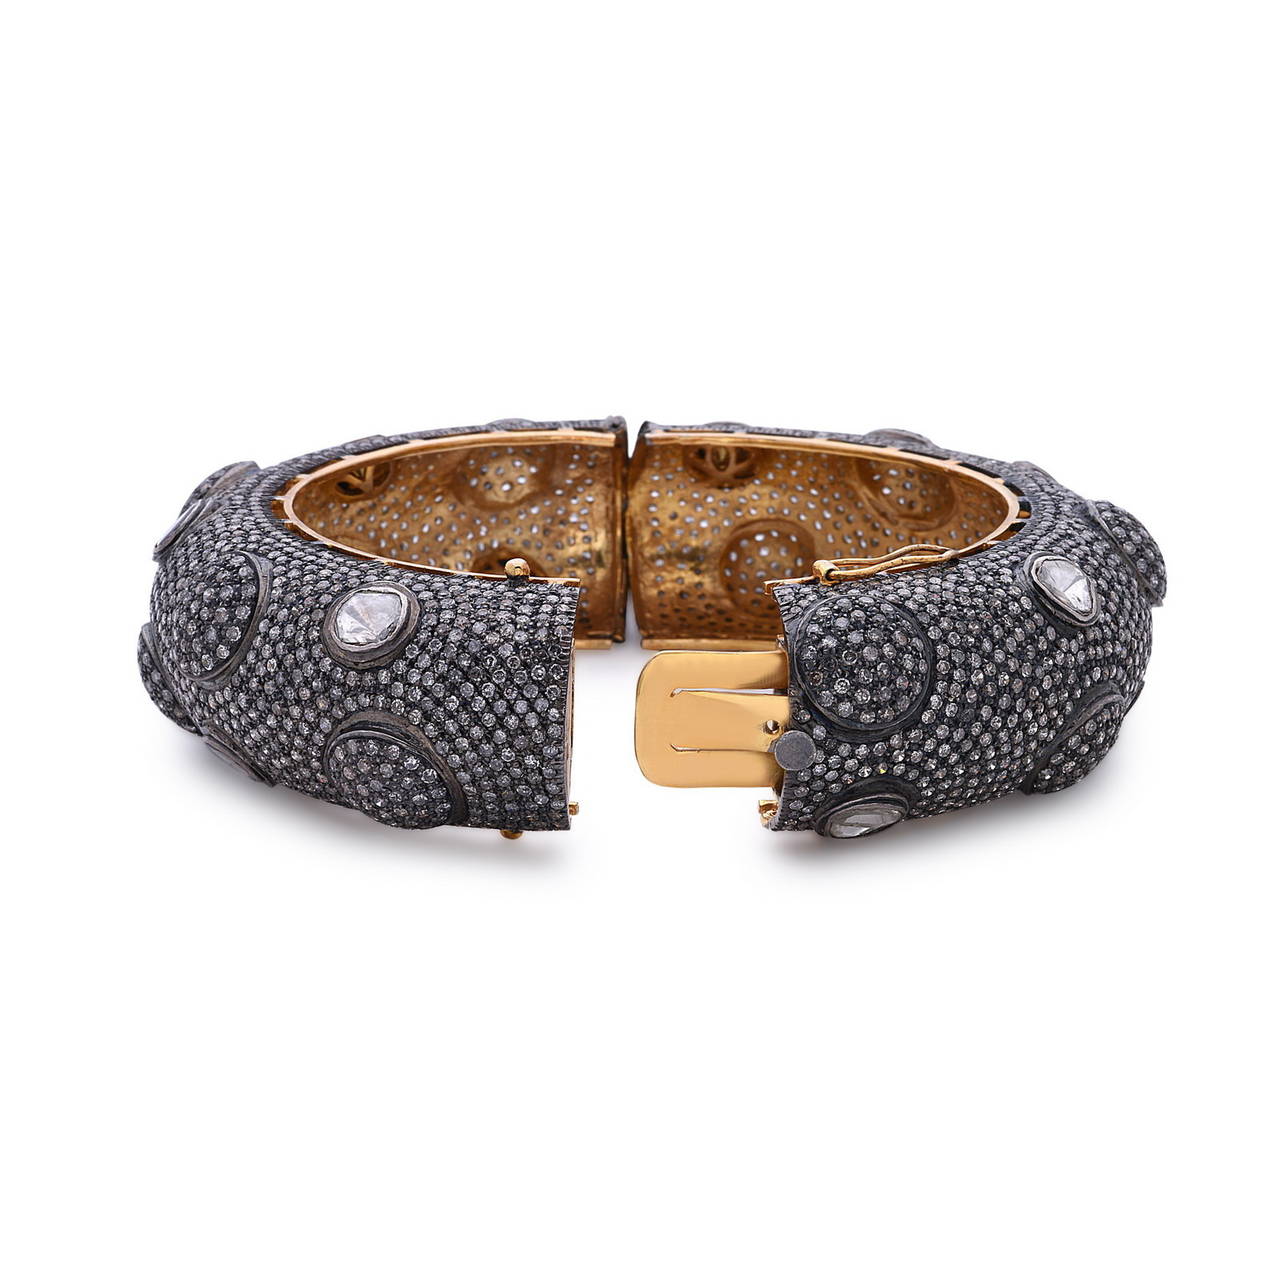 This stunning pave domed bangle is one of the best we have made of its kind, surrounded by a ring of rose cut diamonds. It sits comfortably around the wrist as it is openable with 2 clasps, totaling to 32.95 cts of diamonds set on silver and 14K